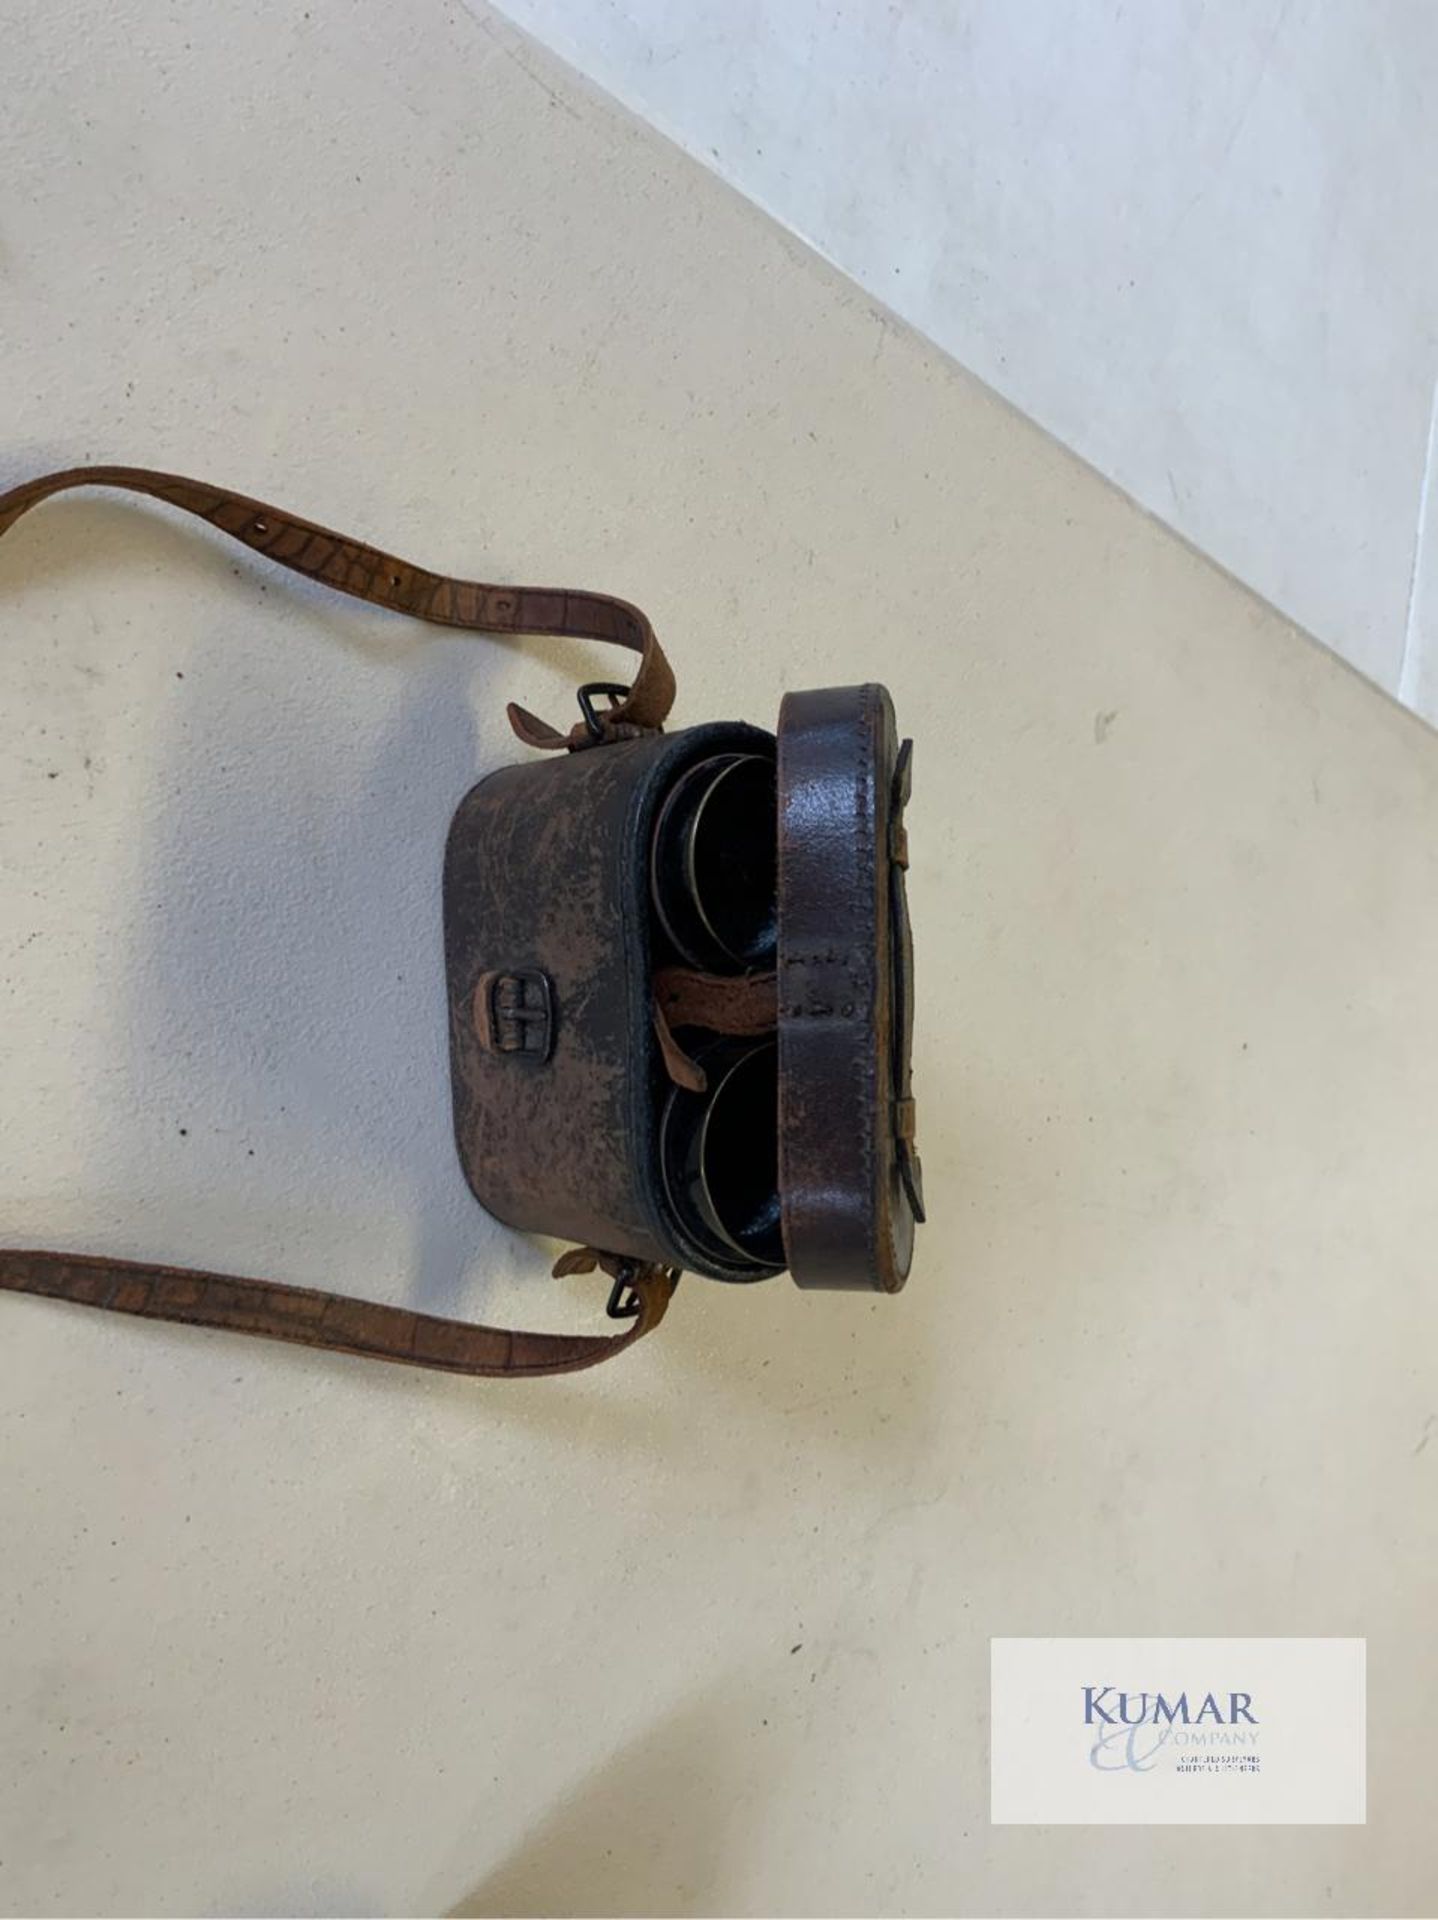 2: Sets of Binoculars in Carry Cases - As Shown - Image 11 of 11